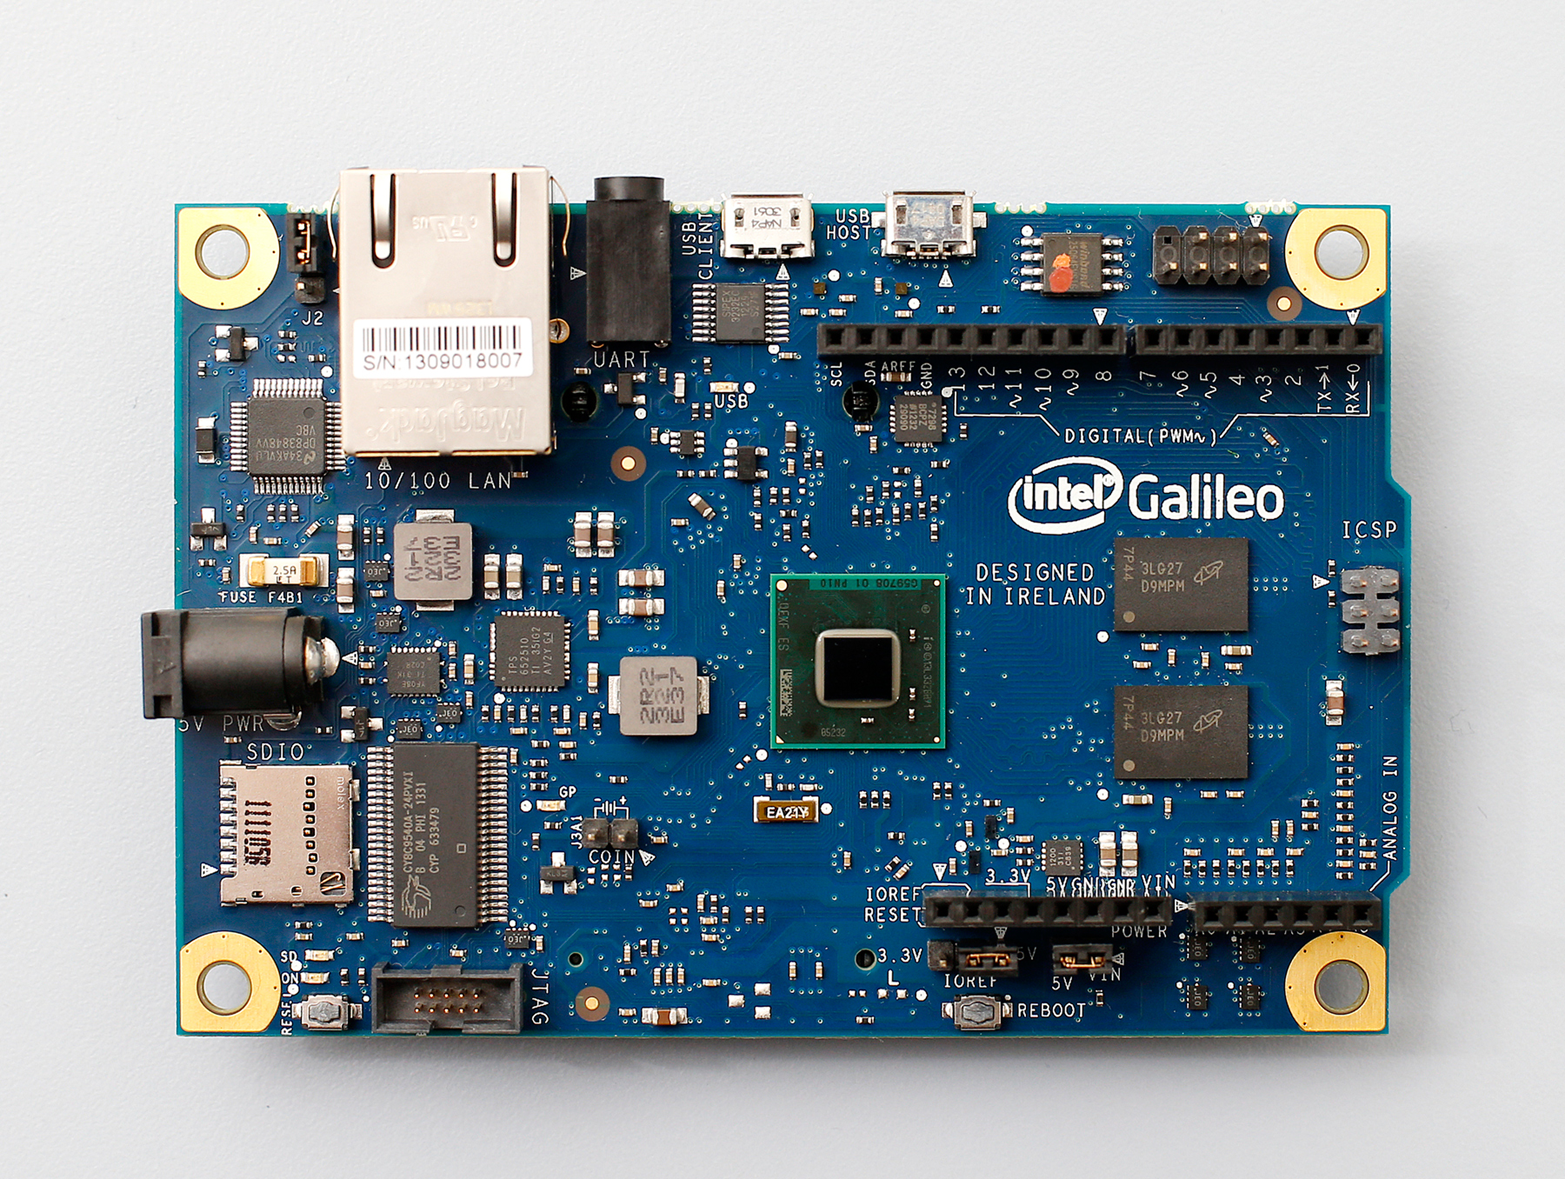 Intel’s Galileo is based on the x86 architecture and supports Arduino hardware expansion cards and software libraries (Photo courtesy Intel)